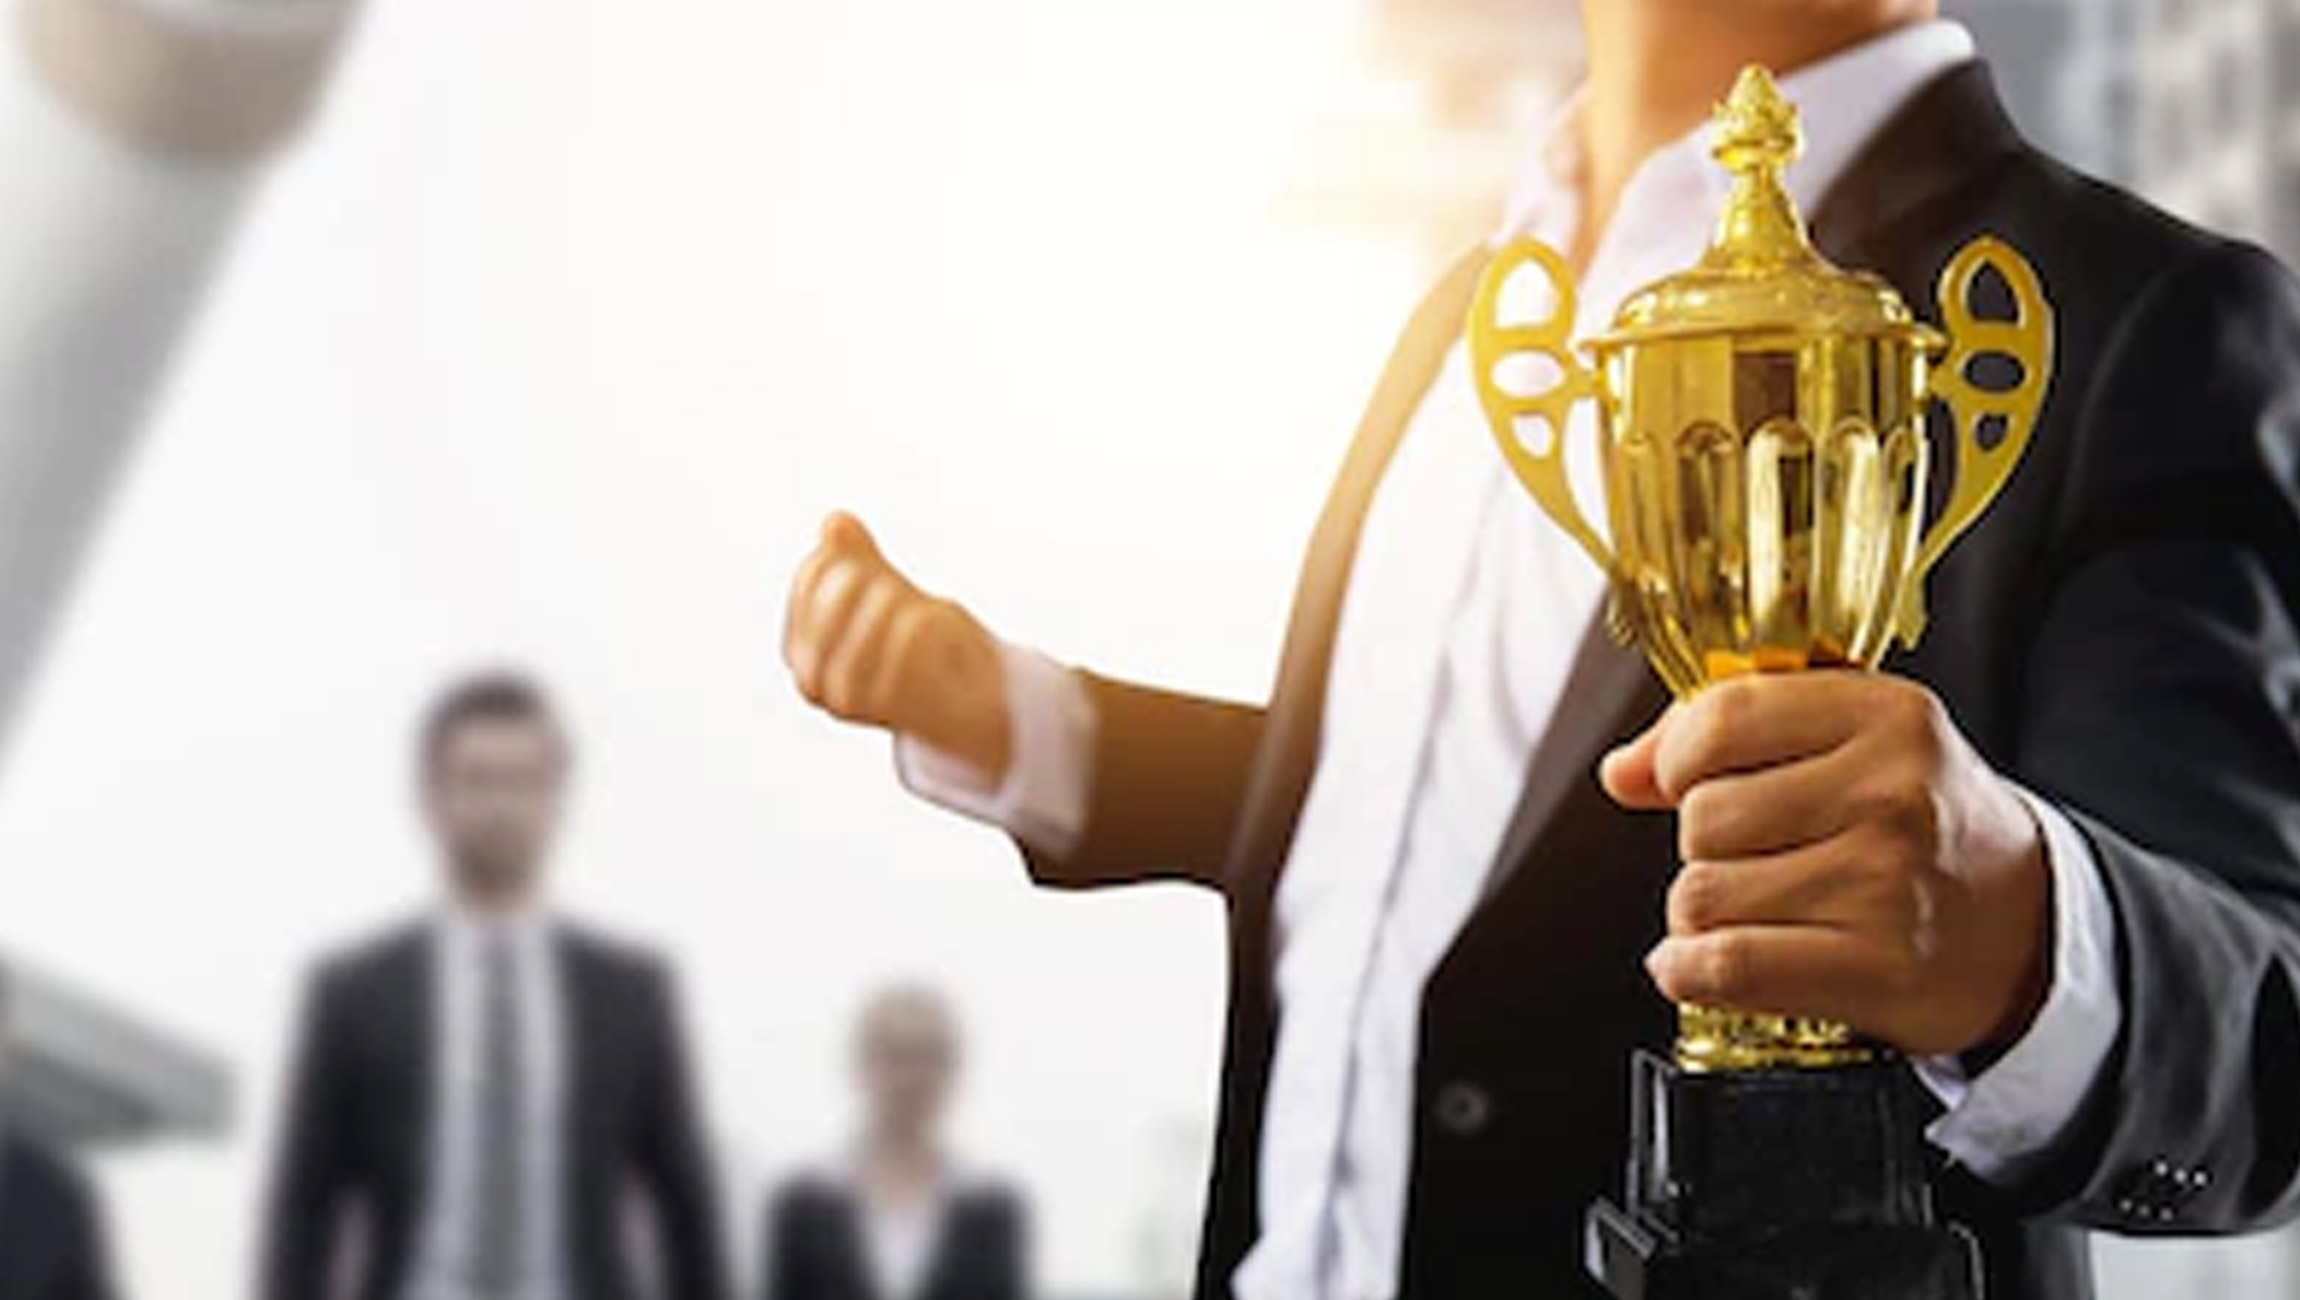 GUIDEcx Named as a Winner in Two Categories of the 2022 SaaS Awards 1